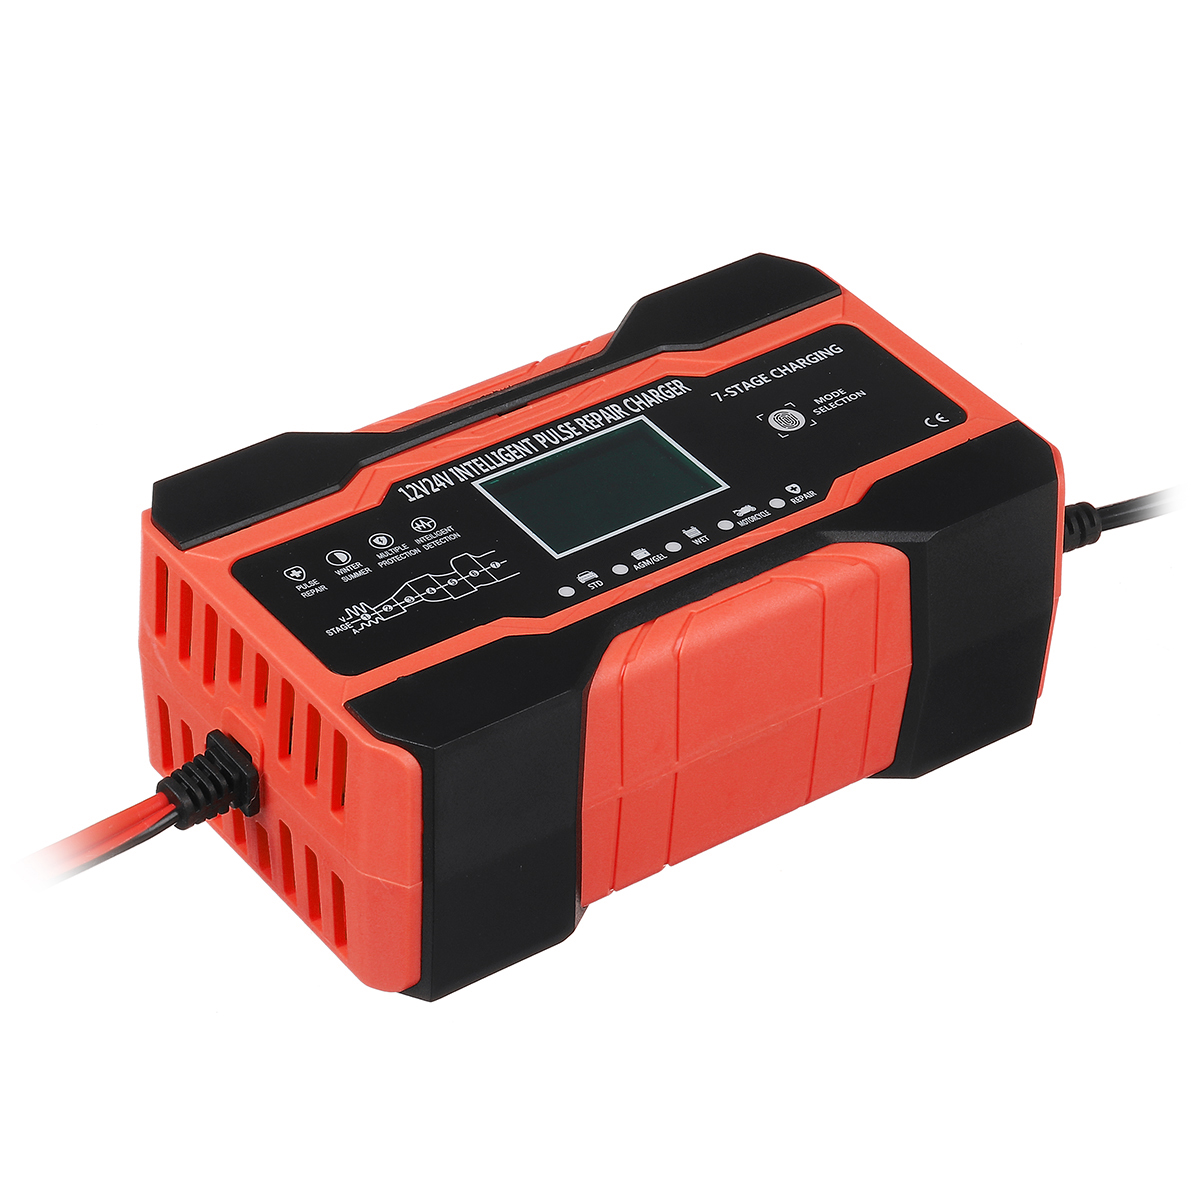 12V 24V 10A Full Automatic Battery Charger LCD Display Power Pulse Repair Charge for Car Motorcycle